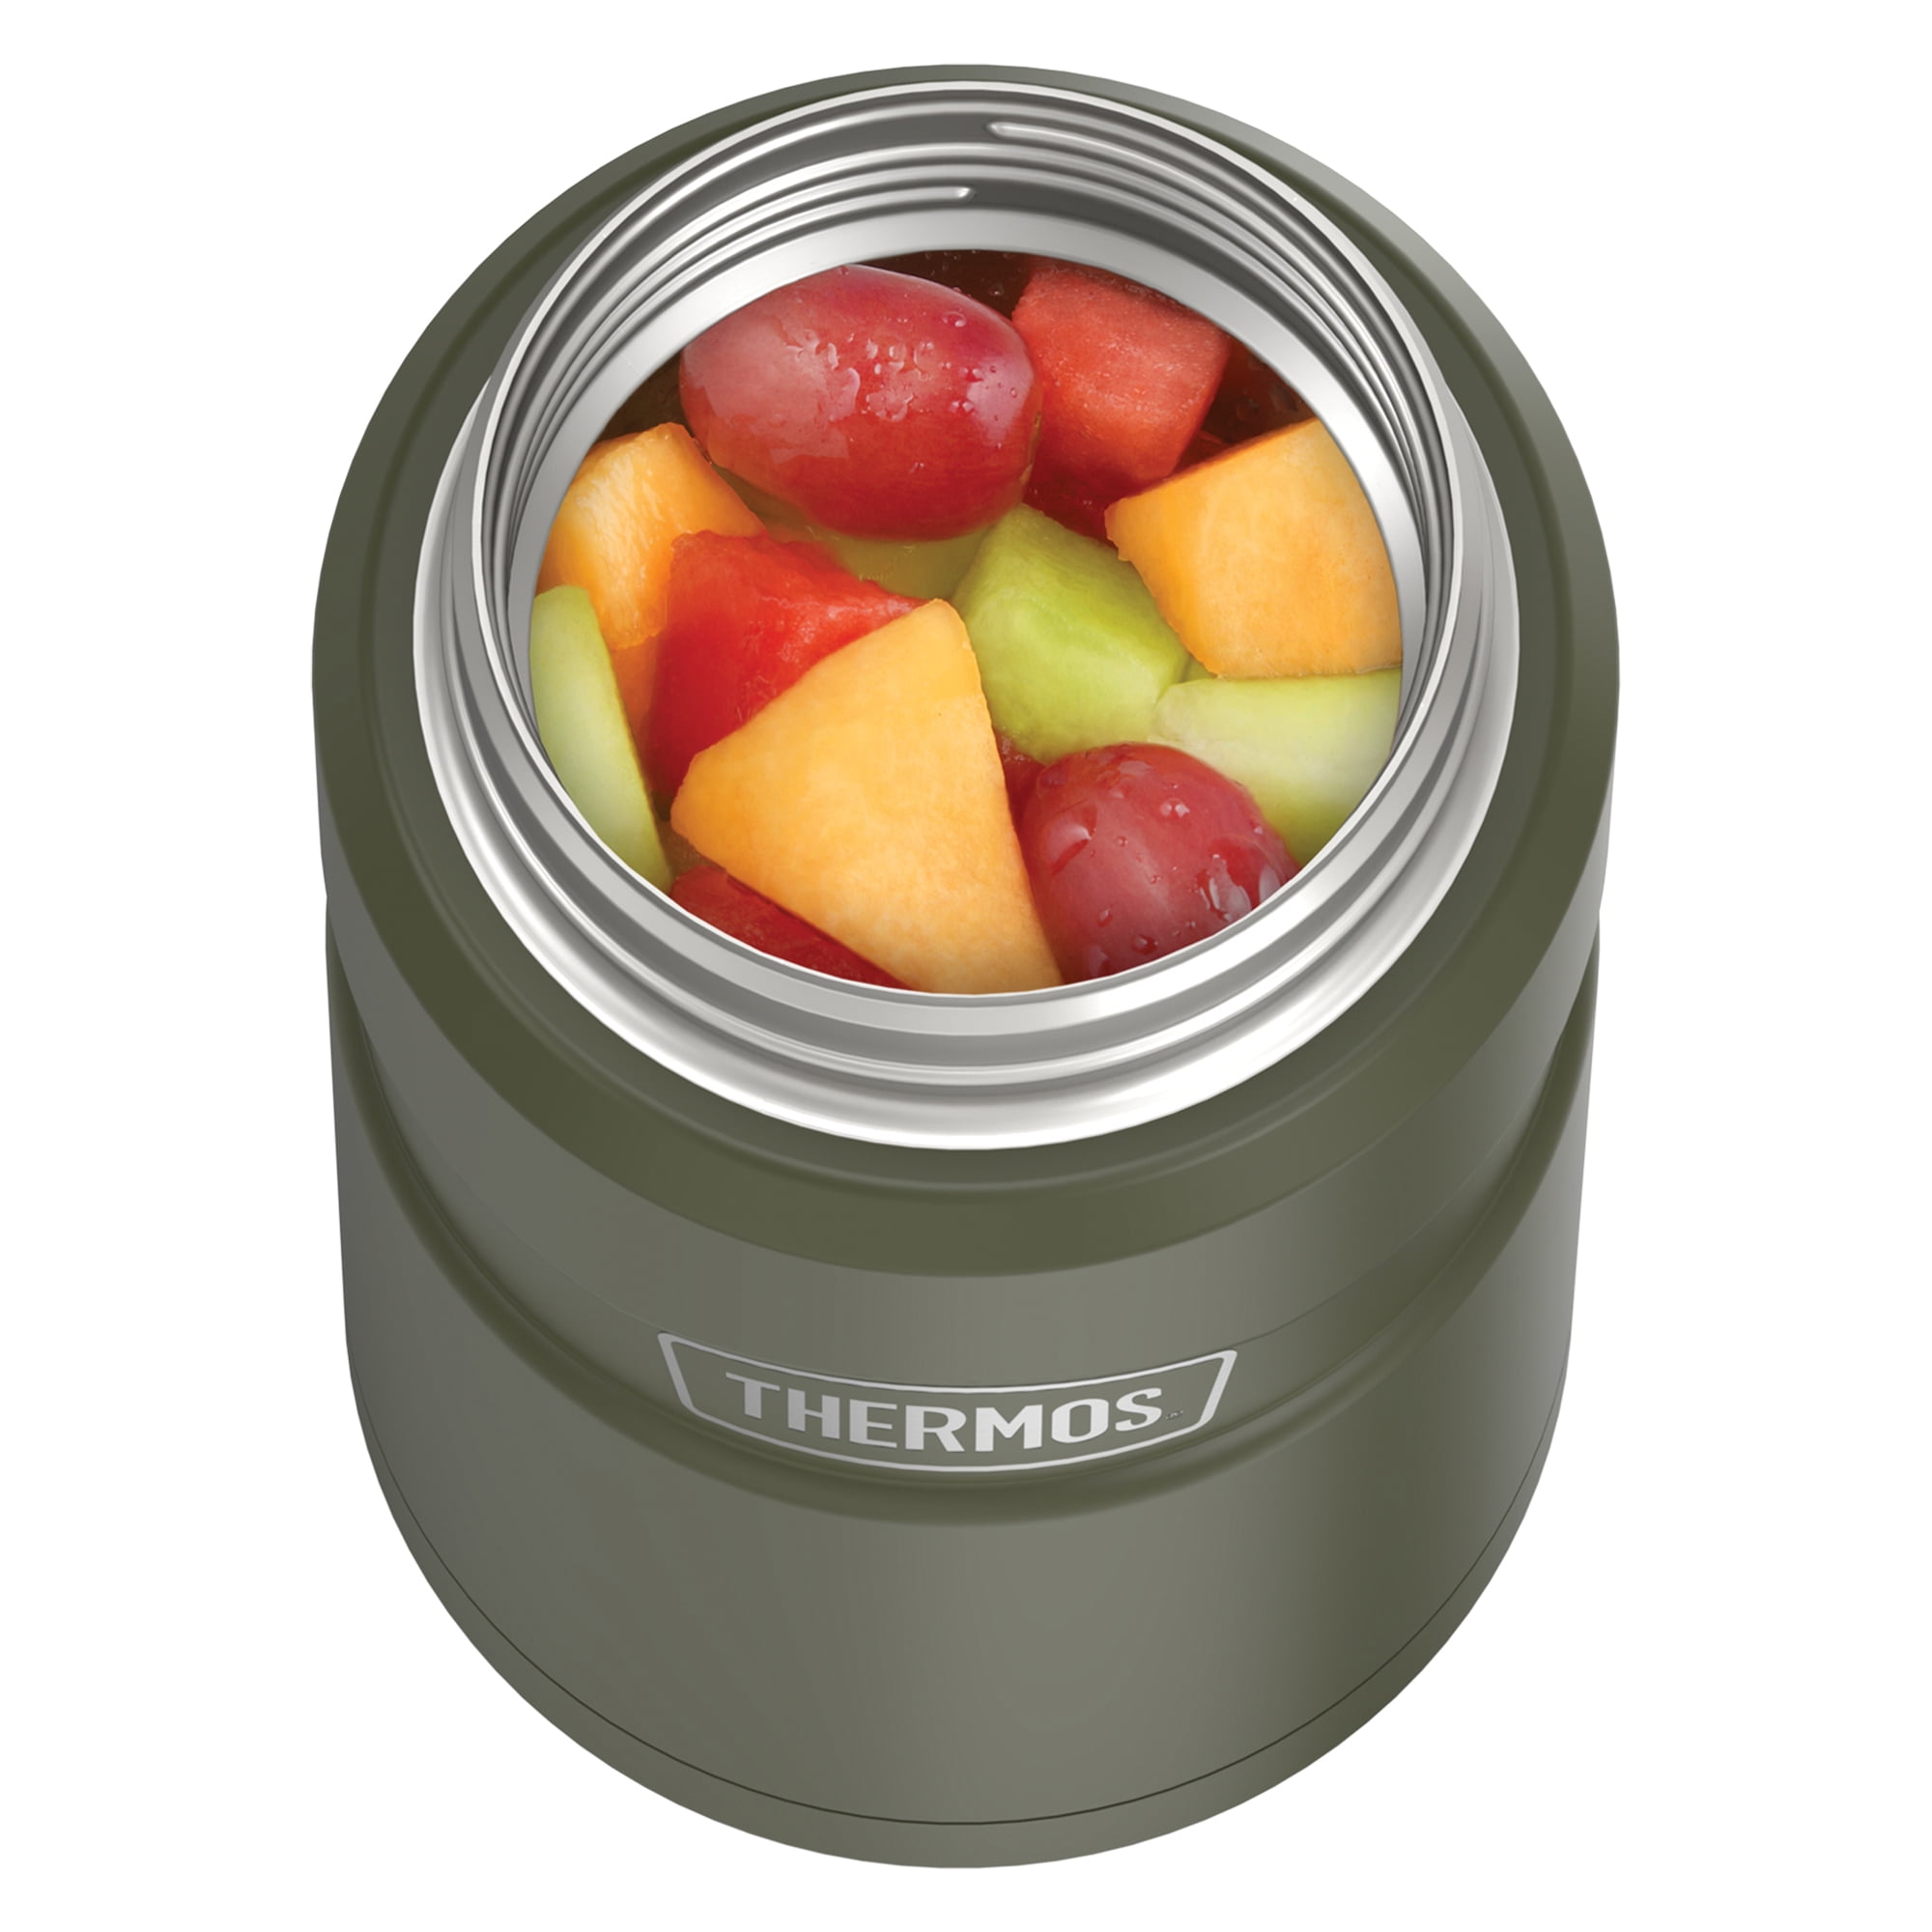  THERMOS Stainless King Vacuum-Insulated Food Jar, 24 Ounce,  Matte Steel : Home & Kitchen